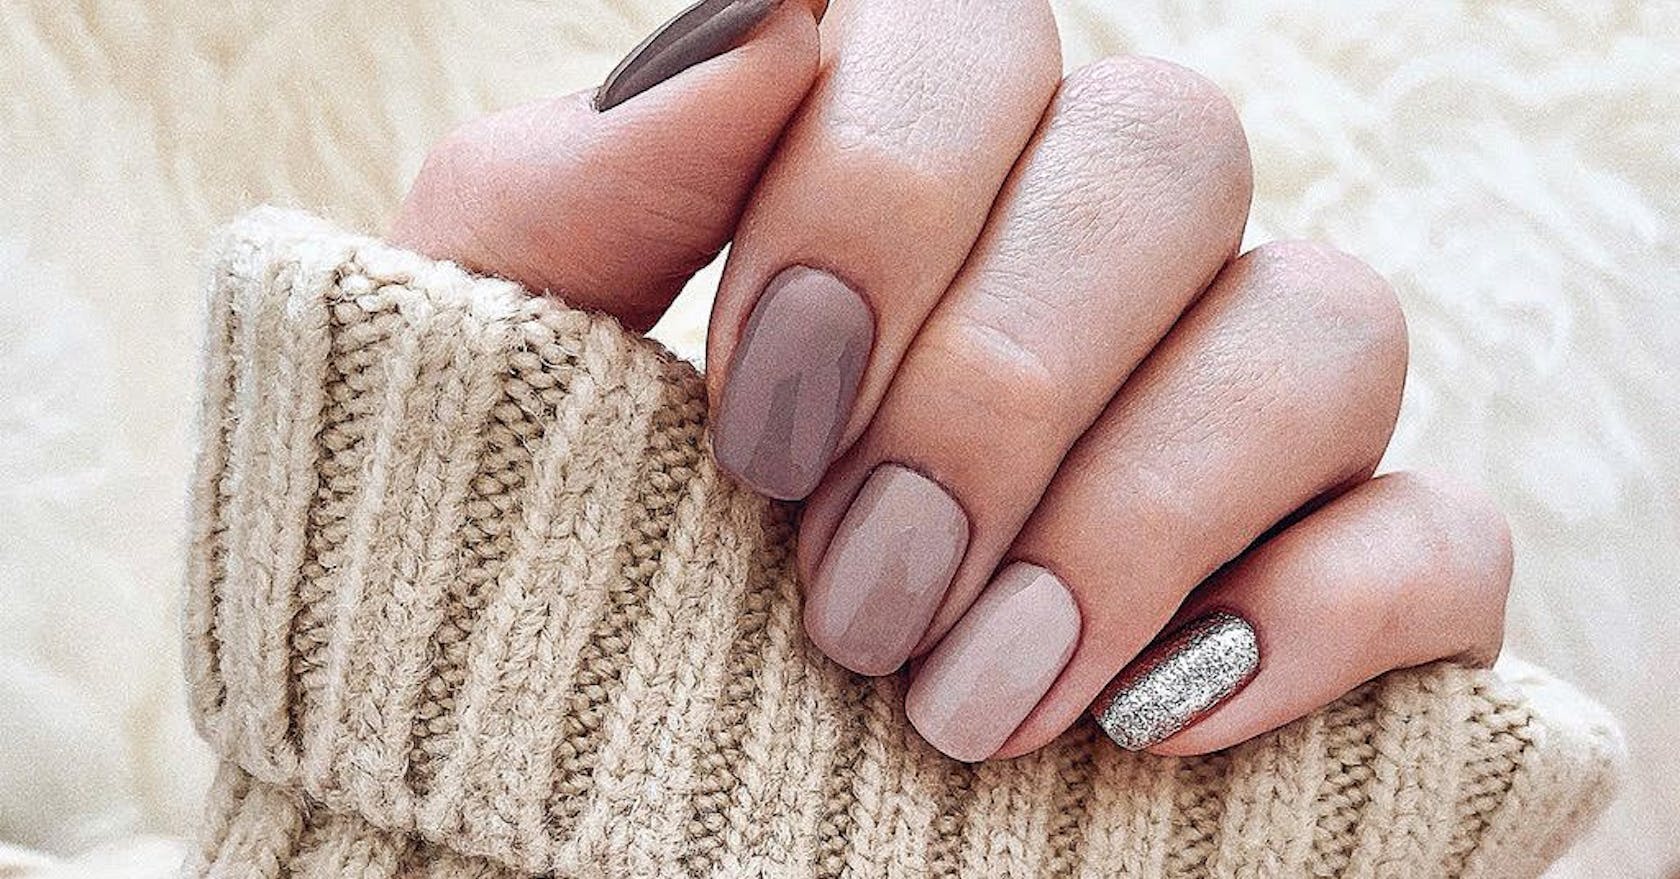 1. "10 Fall and Winter Nail Art Ideas" - wide 8